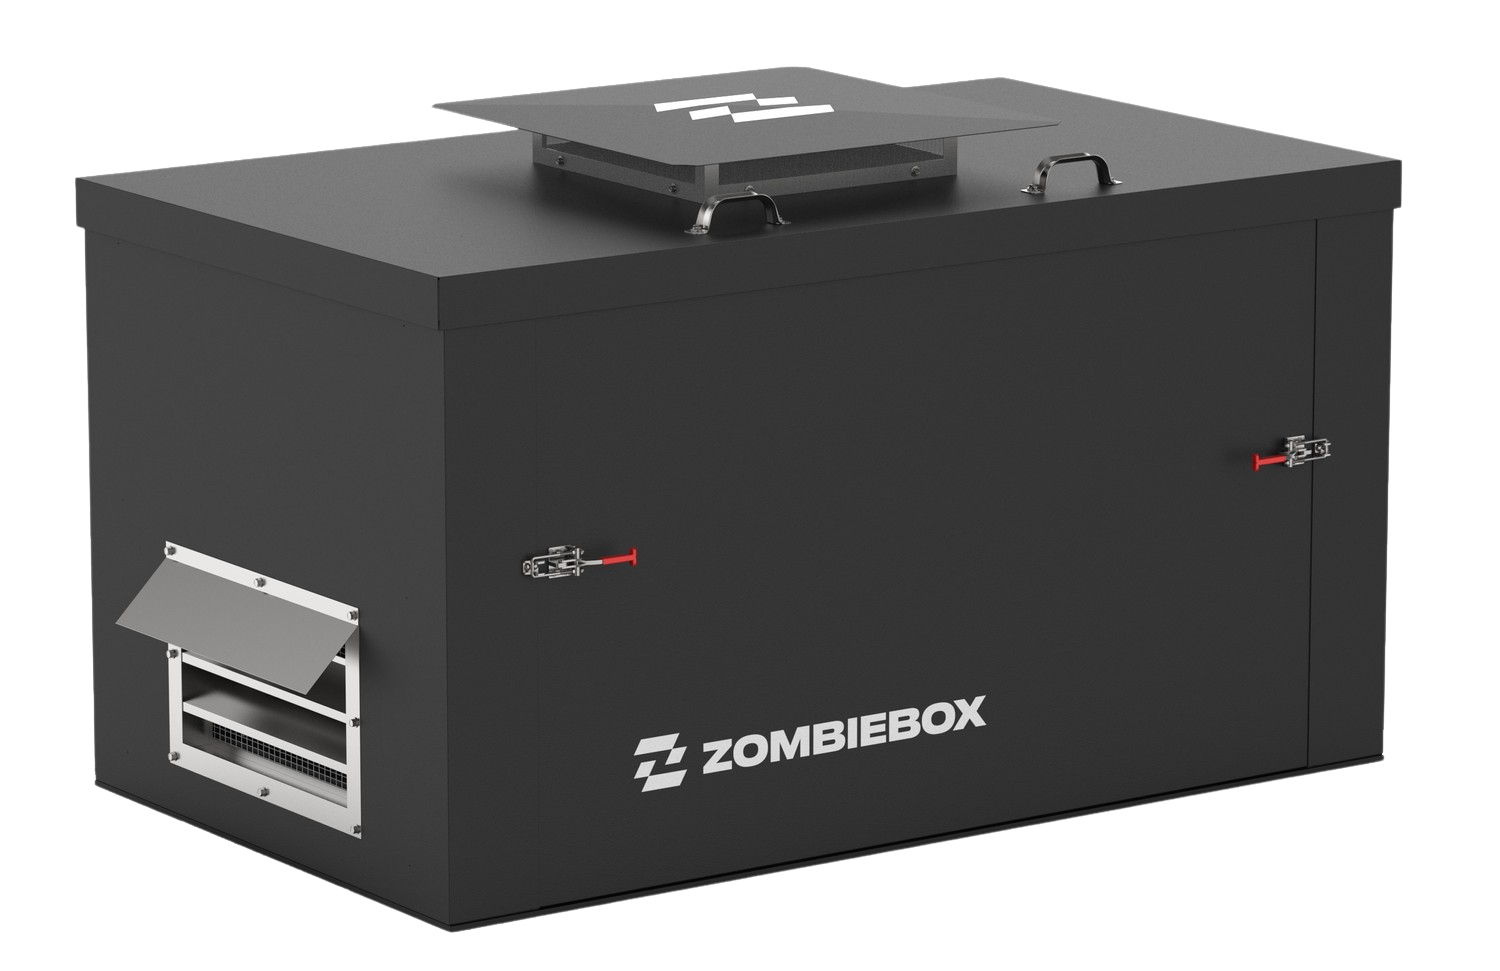 ZOMBIEBOX, Zombiebox Package Deal Home Standby and Backup Generator Enclosure New